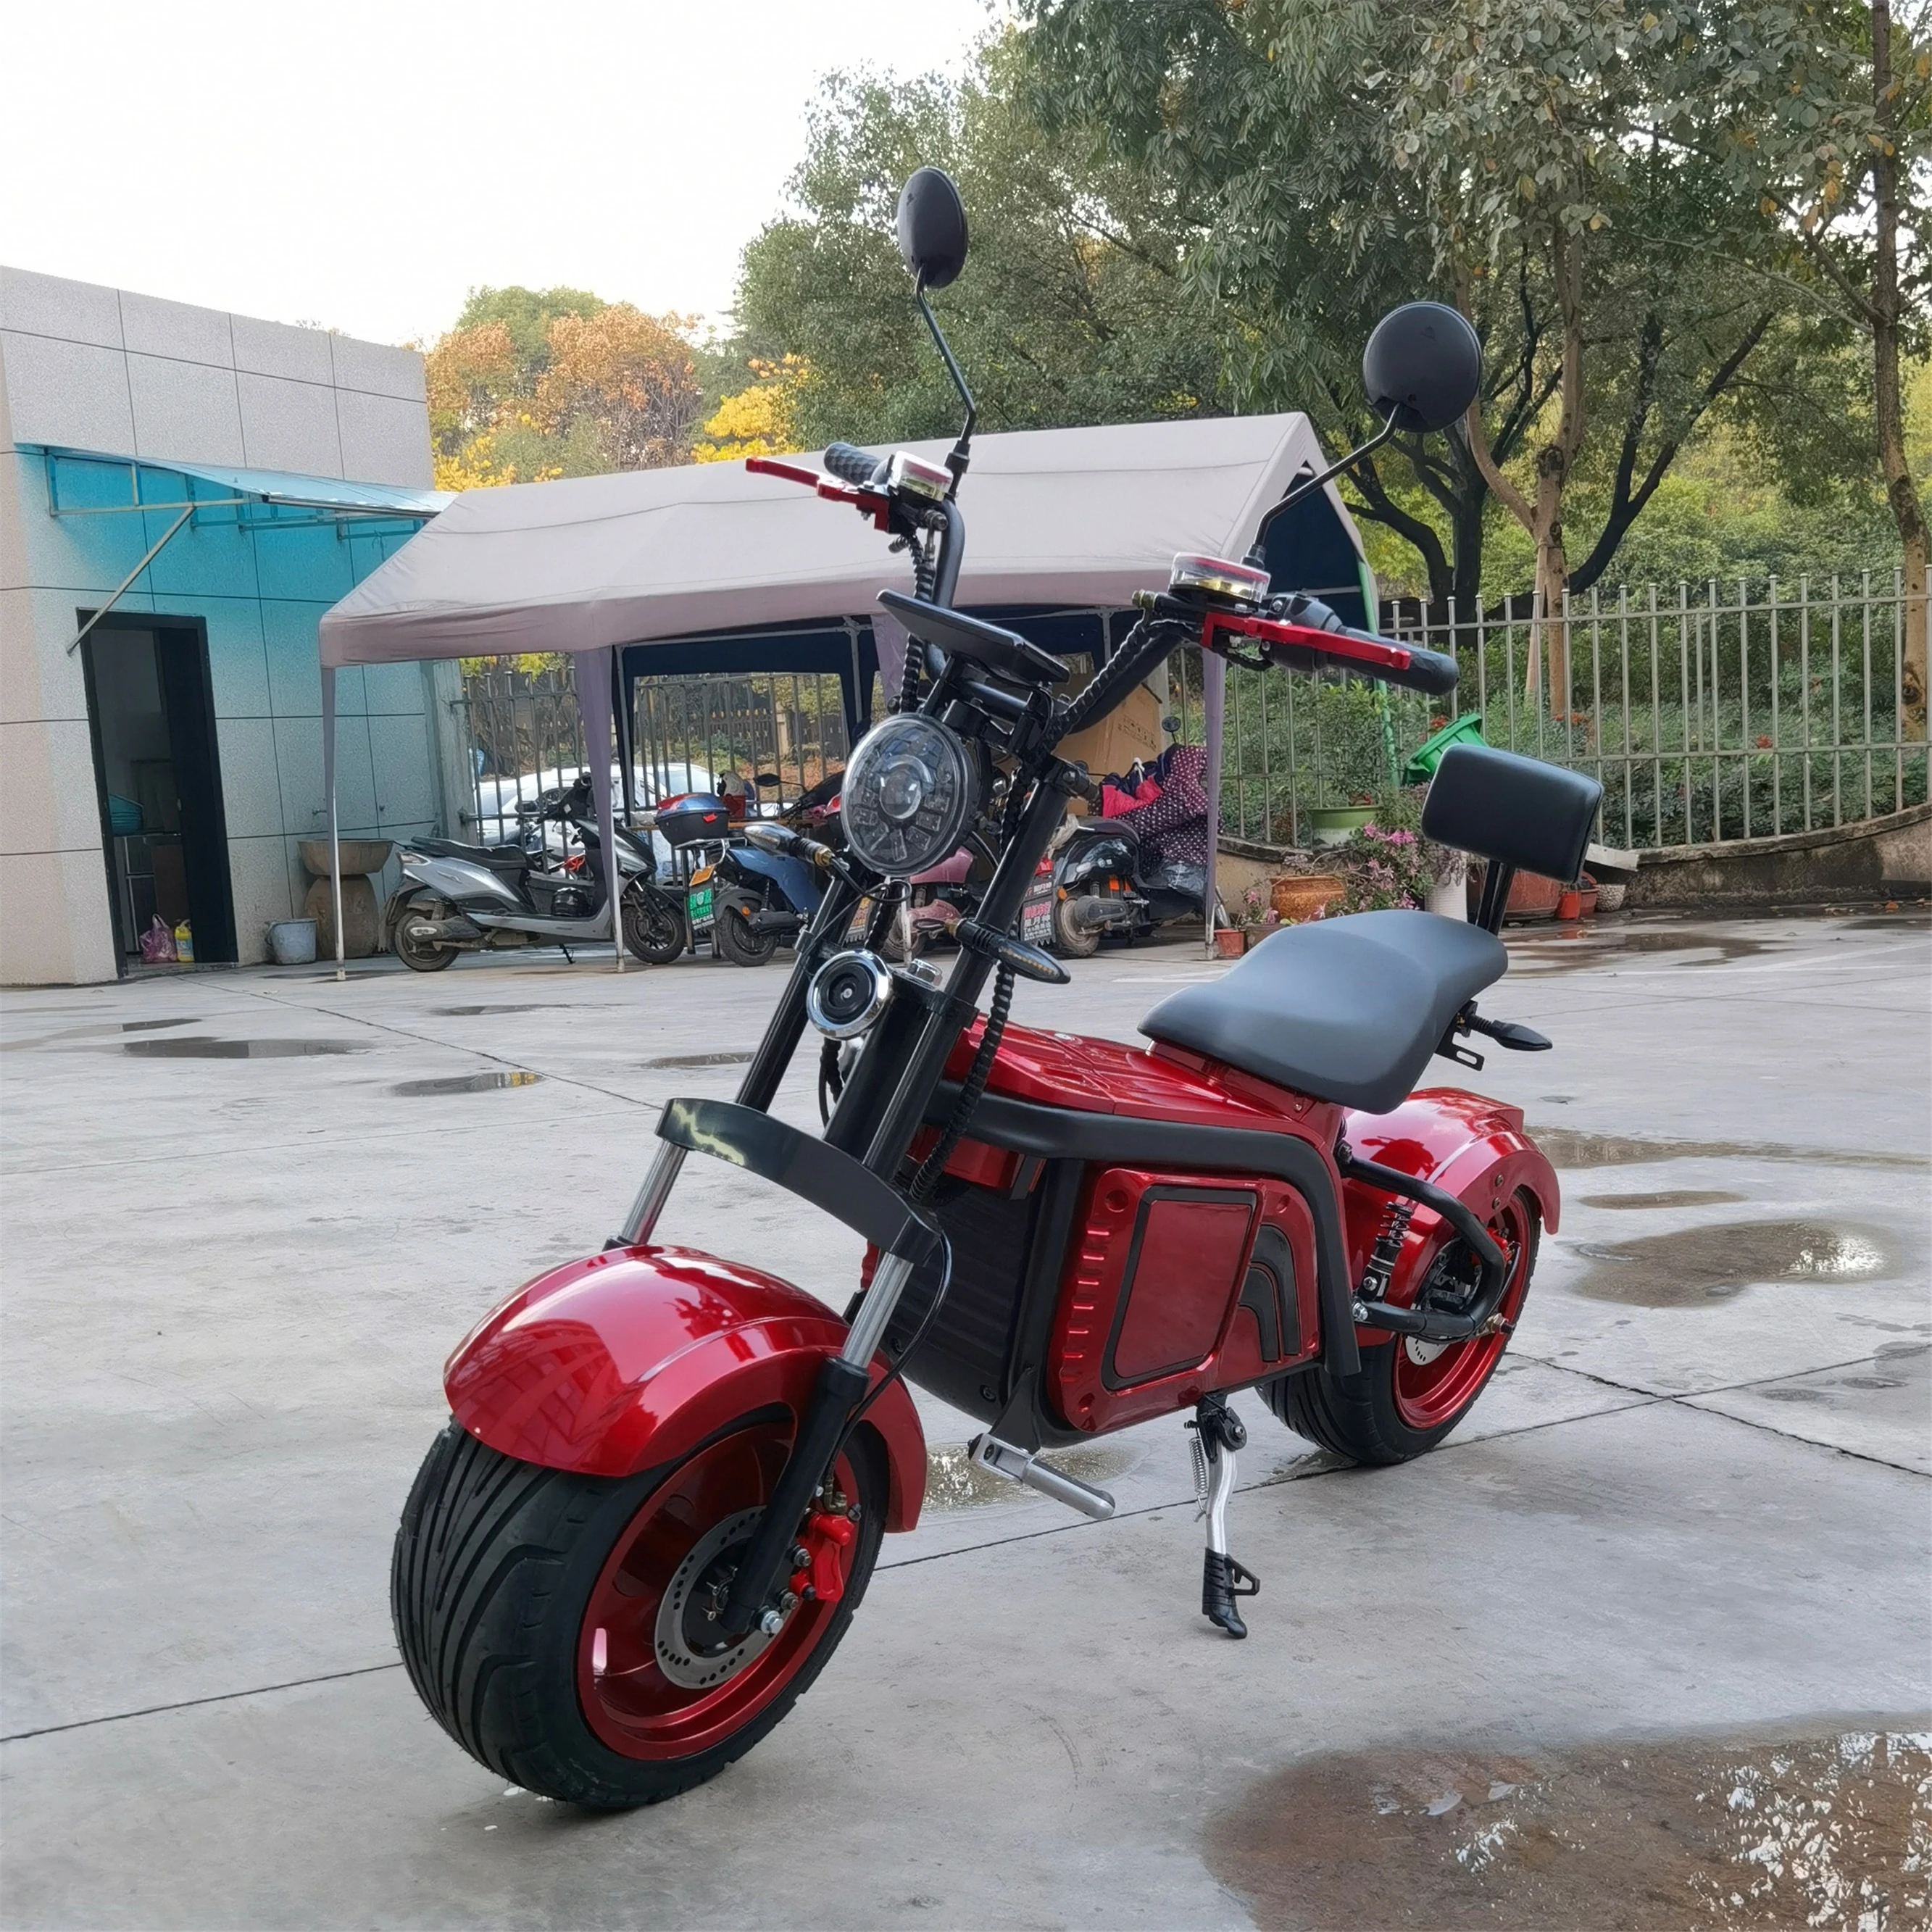 

2022 New Model X5 Fast Speed Citycoco 2000W Electric Motorcycle Scooter Adult EEC/COC Certificate Chopper